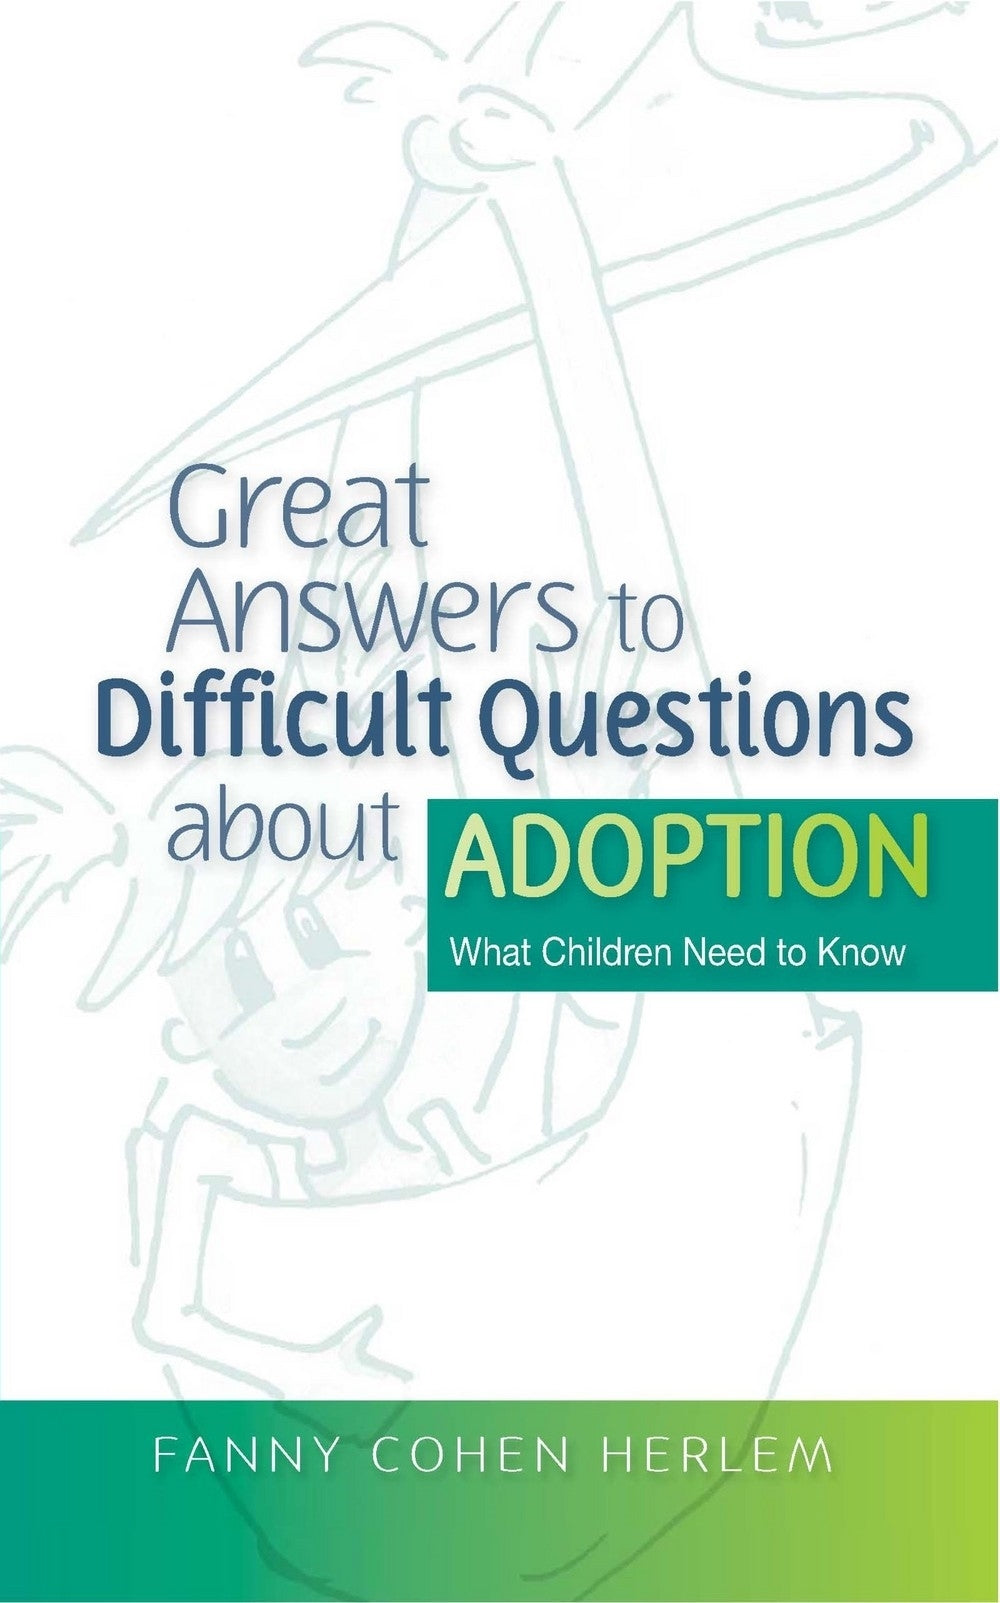 Great Answers to Difficult Questions about Adoption by Fanny  Cohen Herlem